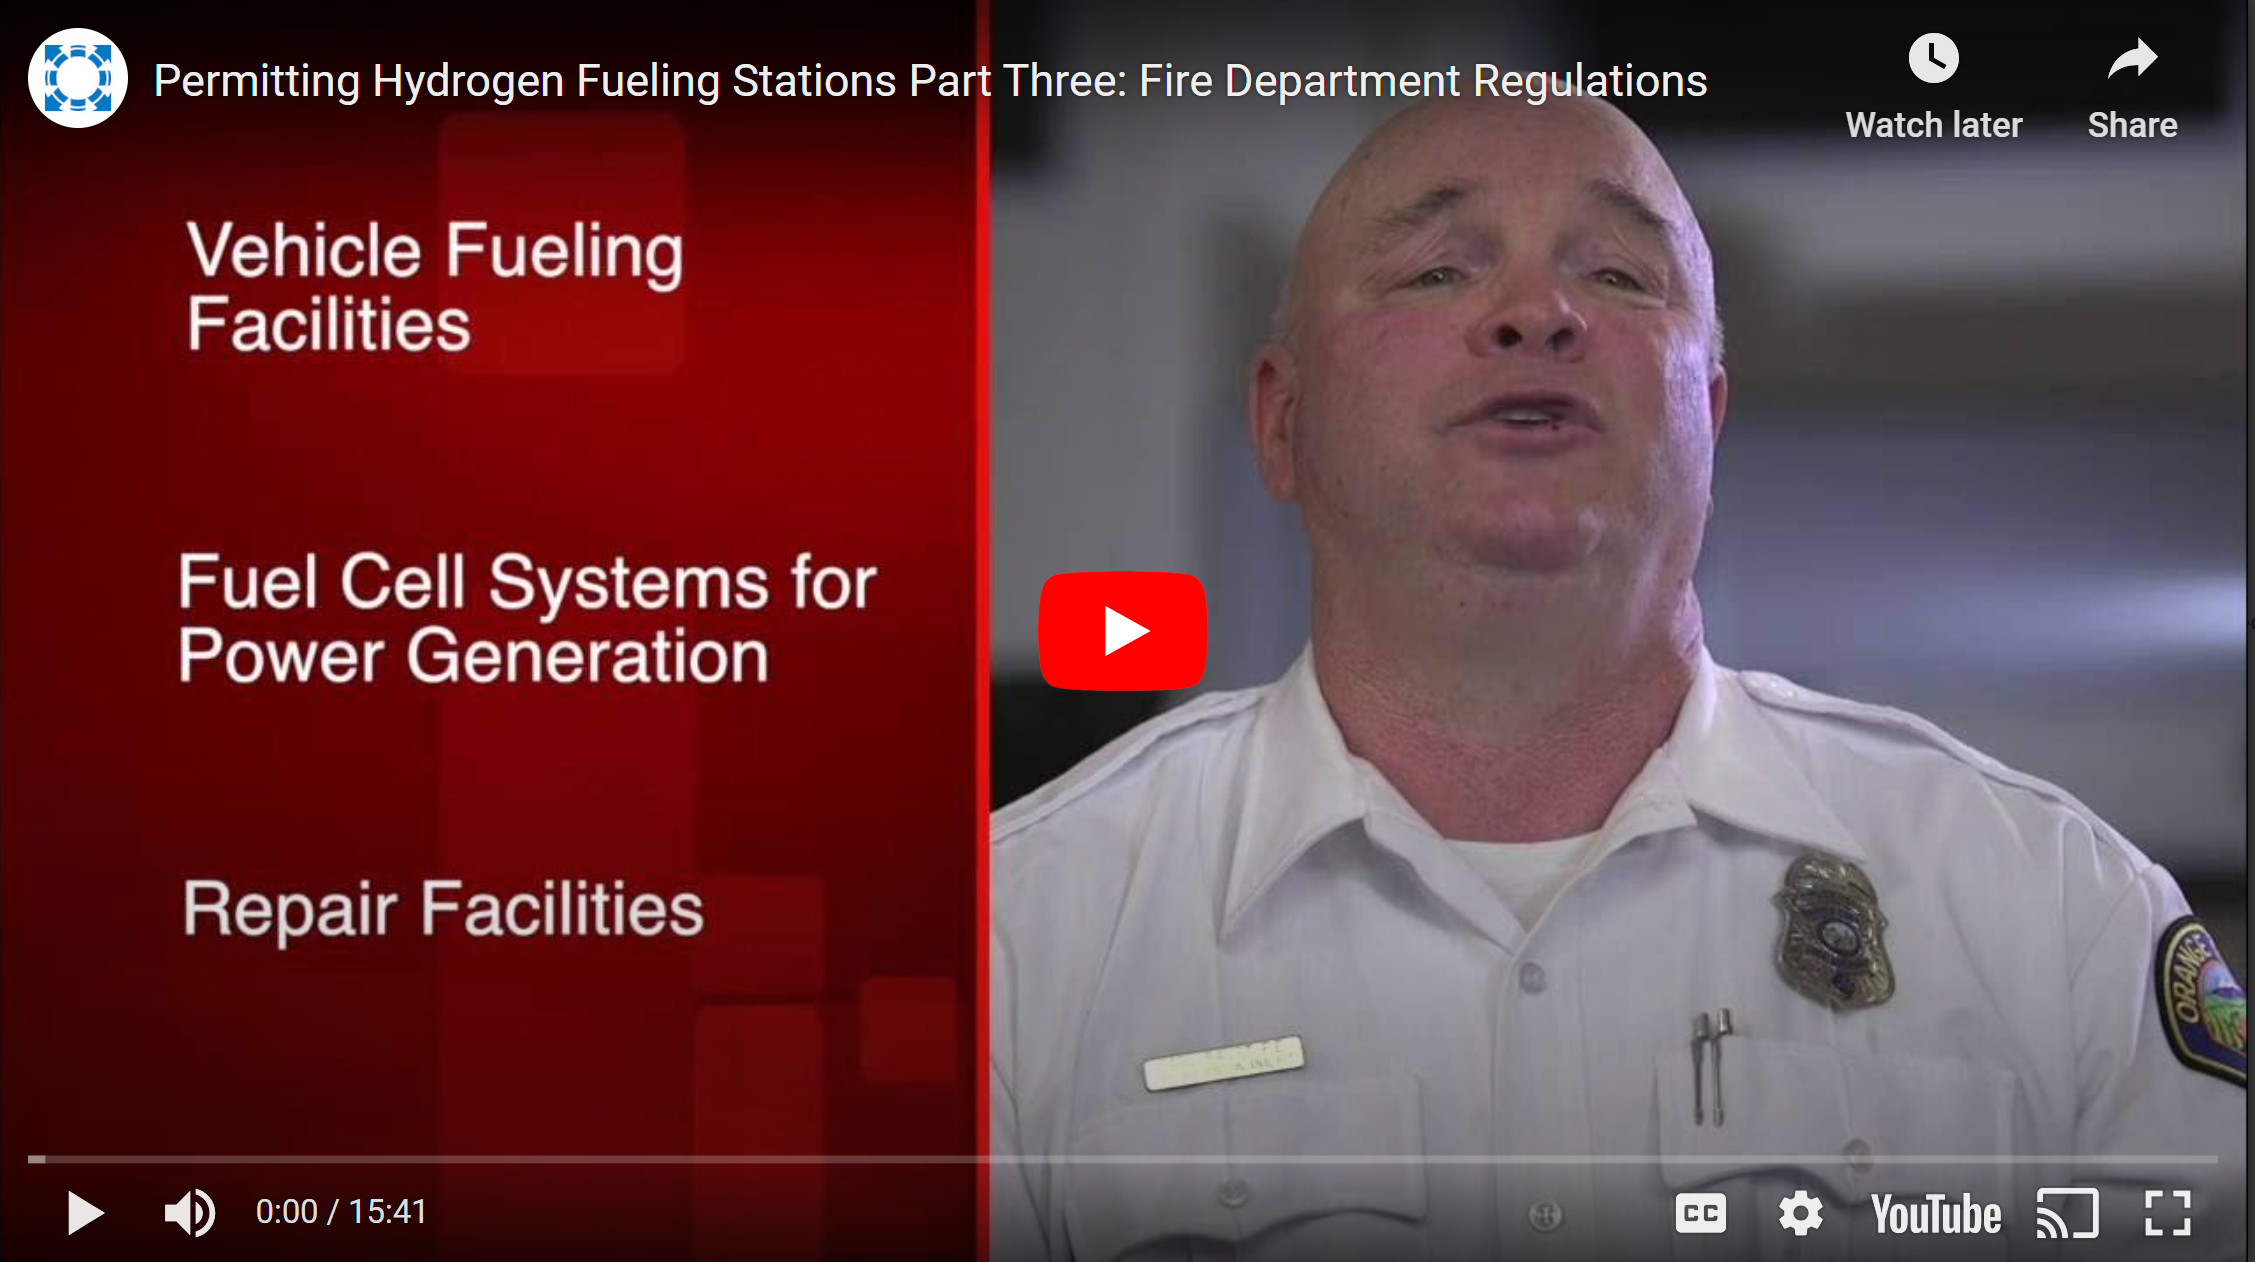 Permitting Hydrogen Fueling Stations Part Three: Fire Department Regulations